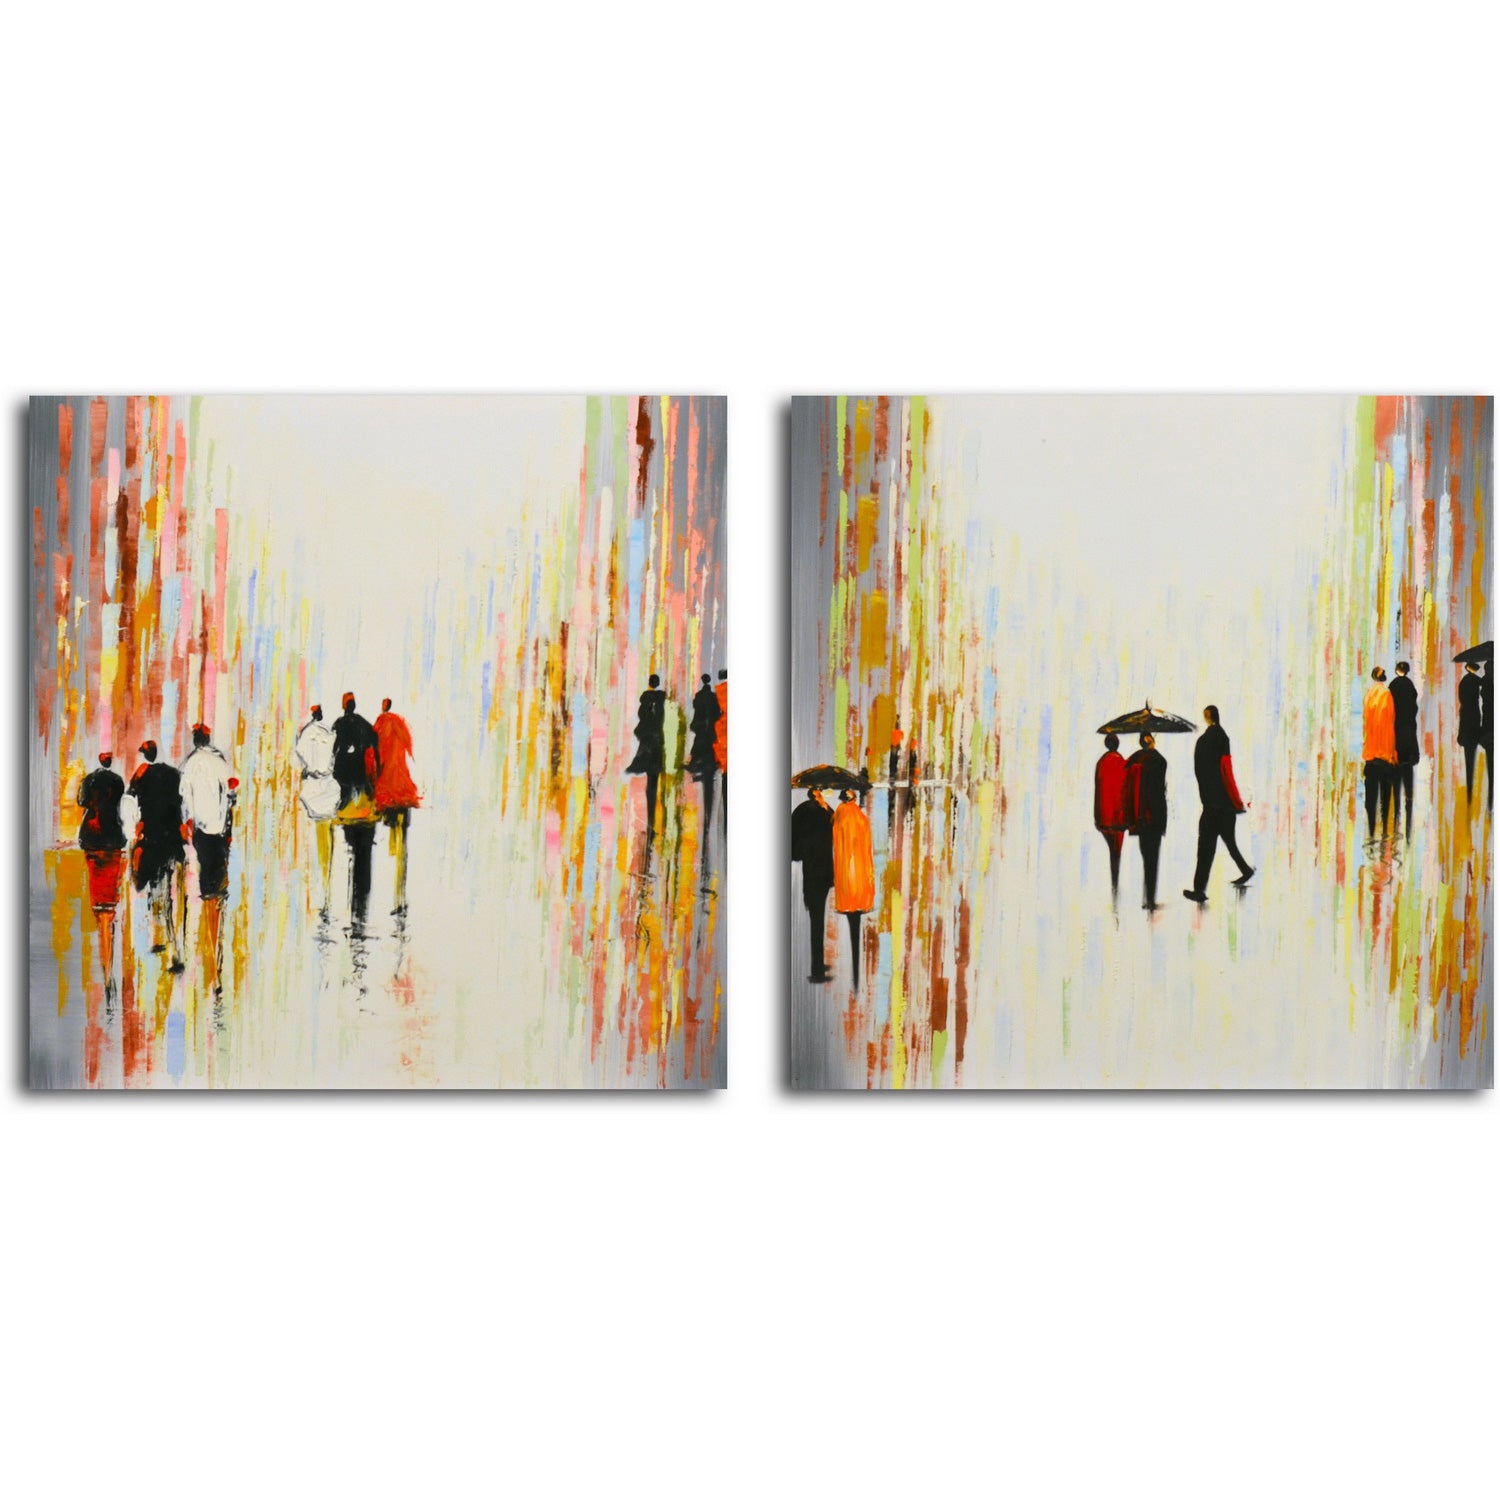 "Rainy Day Breaking" Original painting on canvas - Set of 2